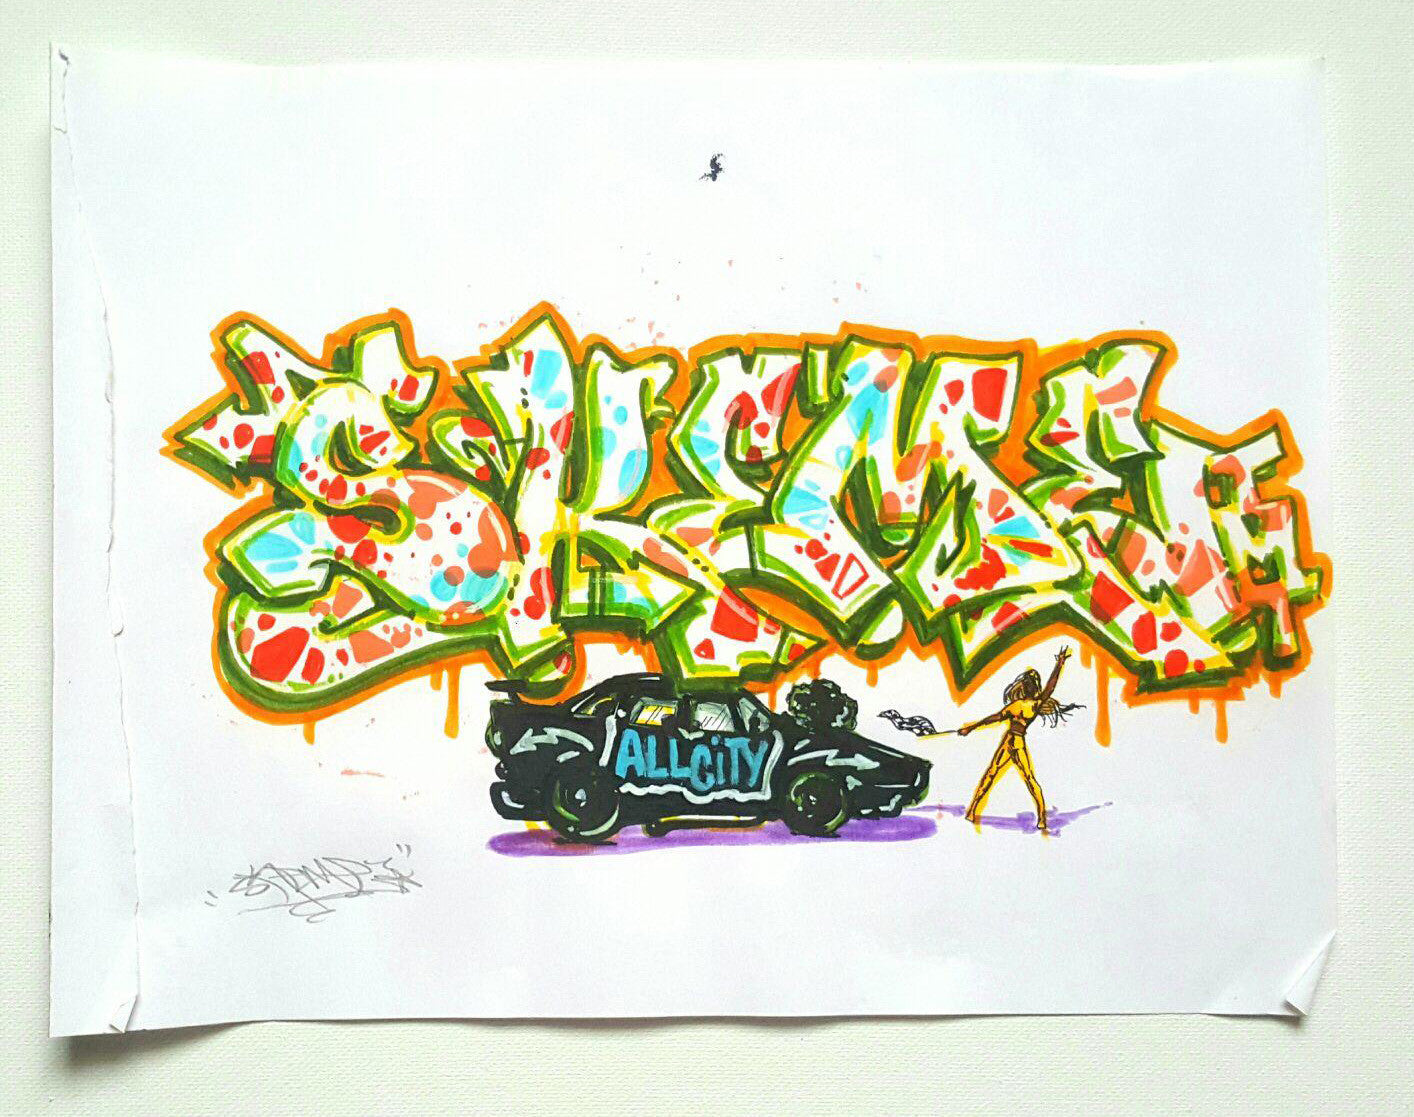 SKEME - "All City Committee" Black Book Drawing